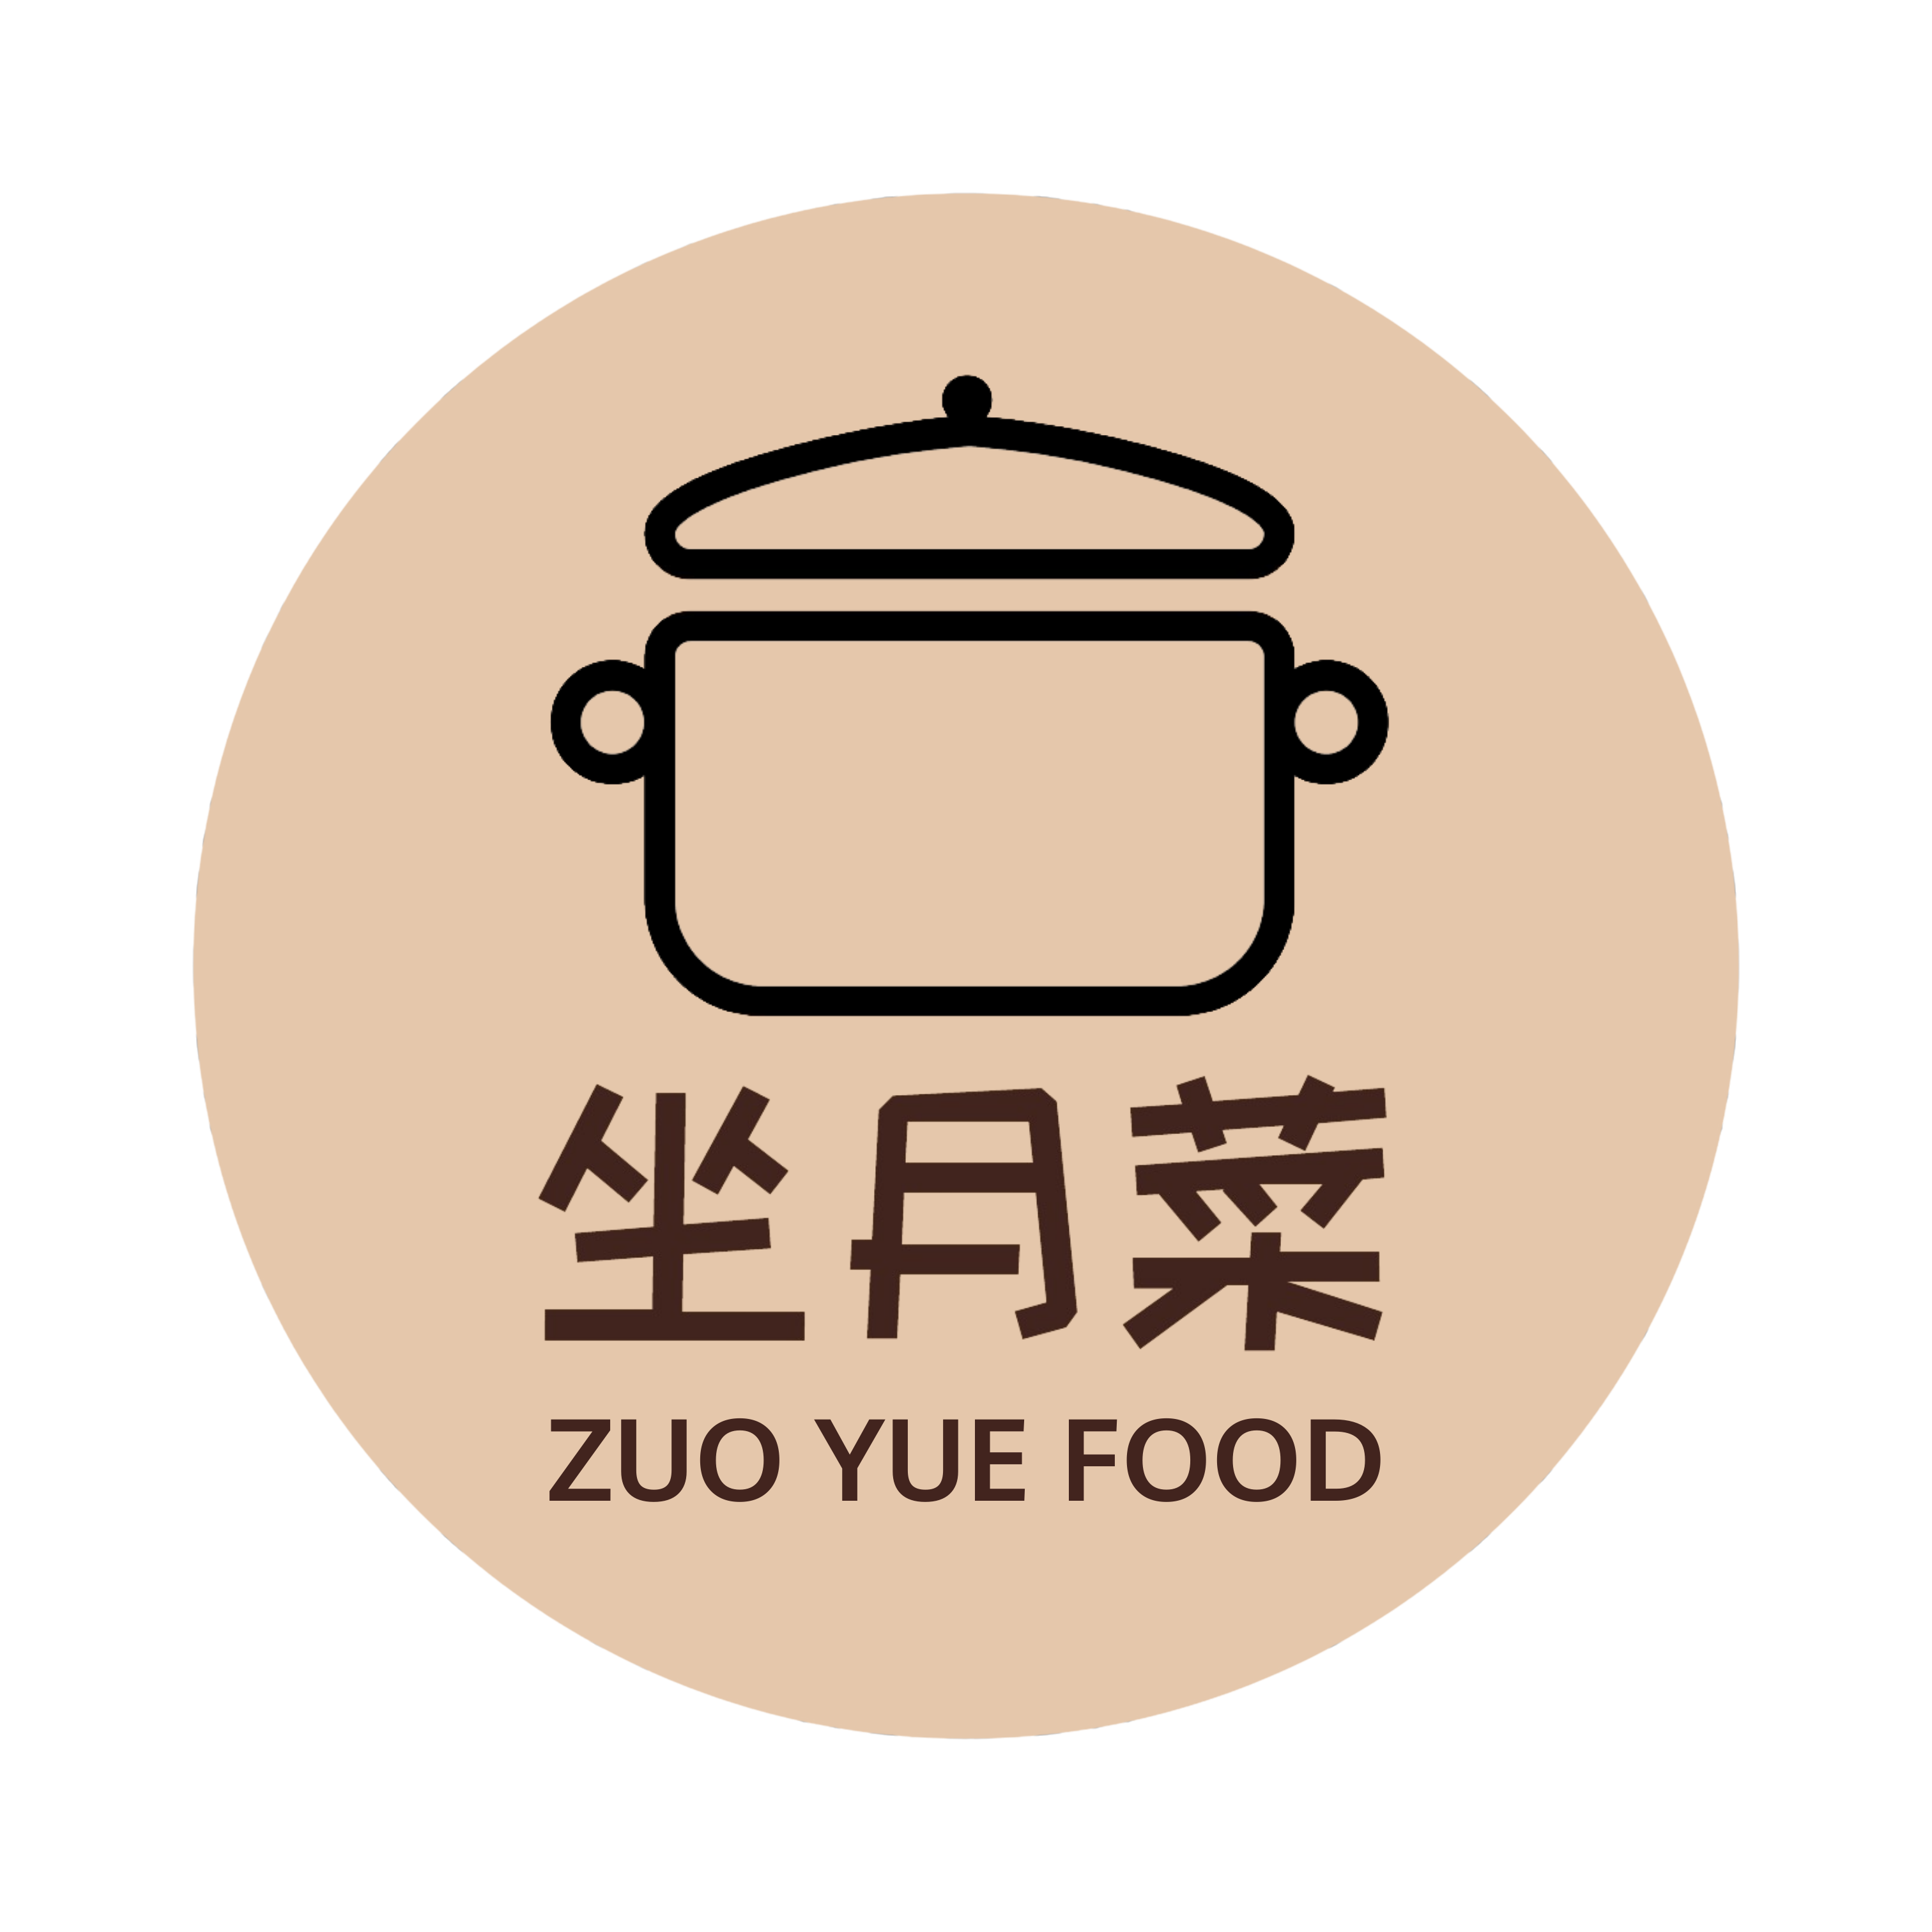 Zuo Yue Food